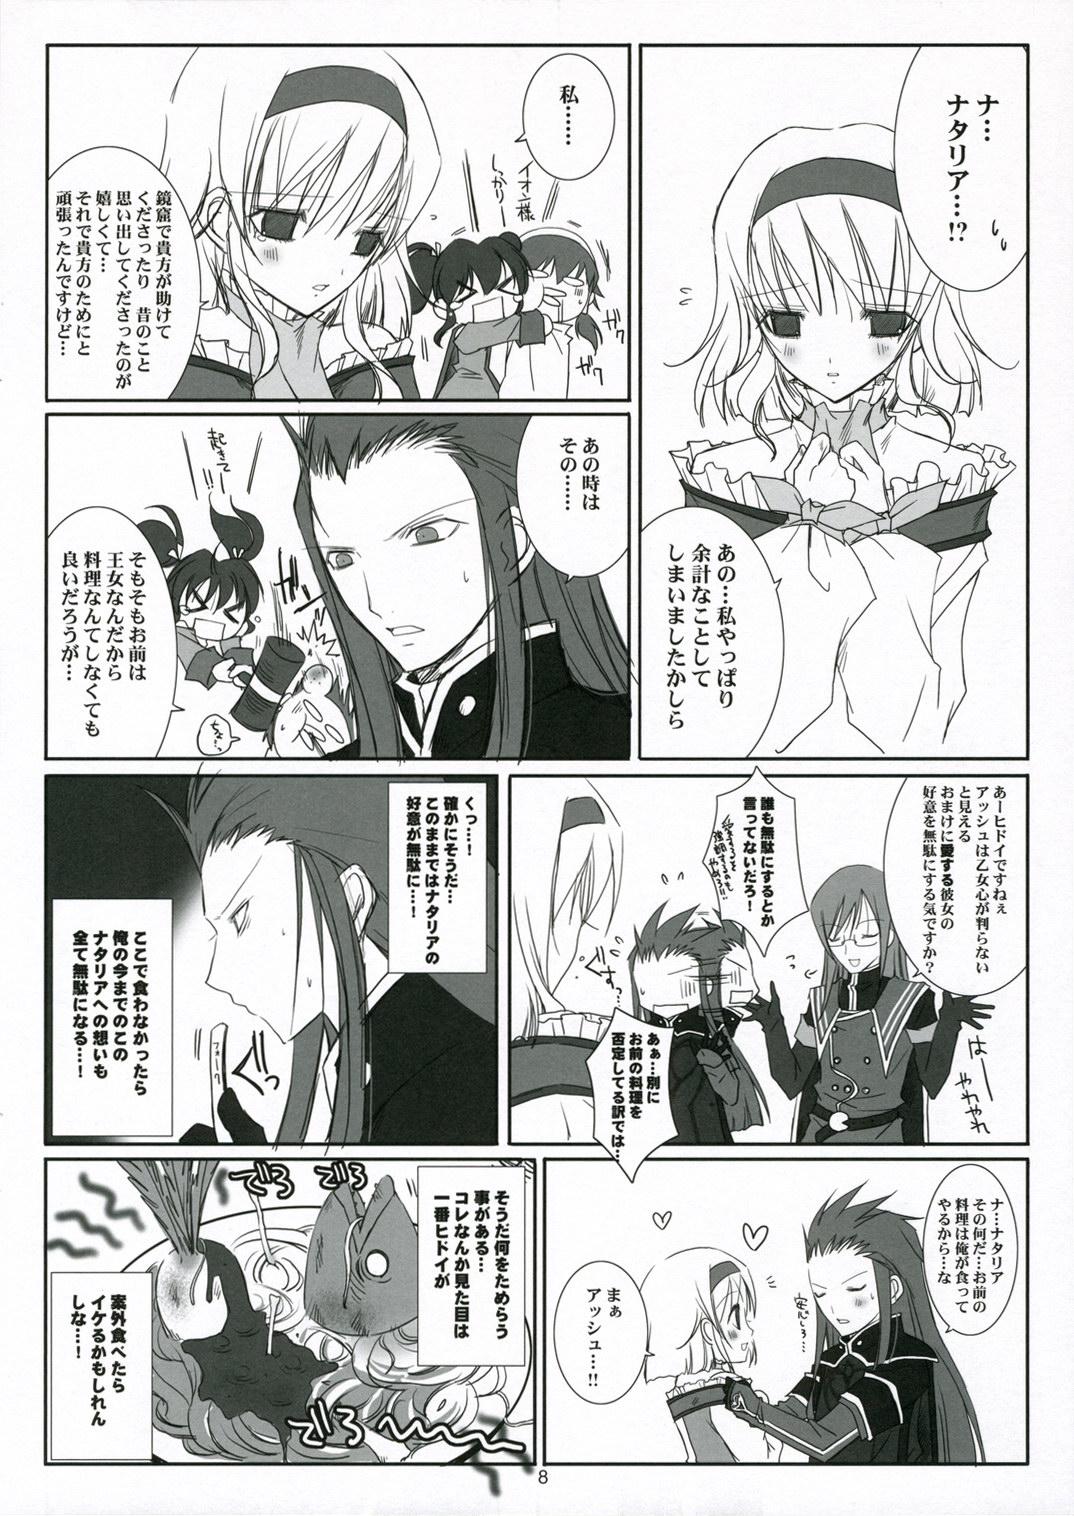 Naturaltits HONEYED - Tales of the abyss Spreading - Page 8